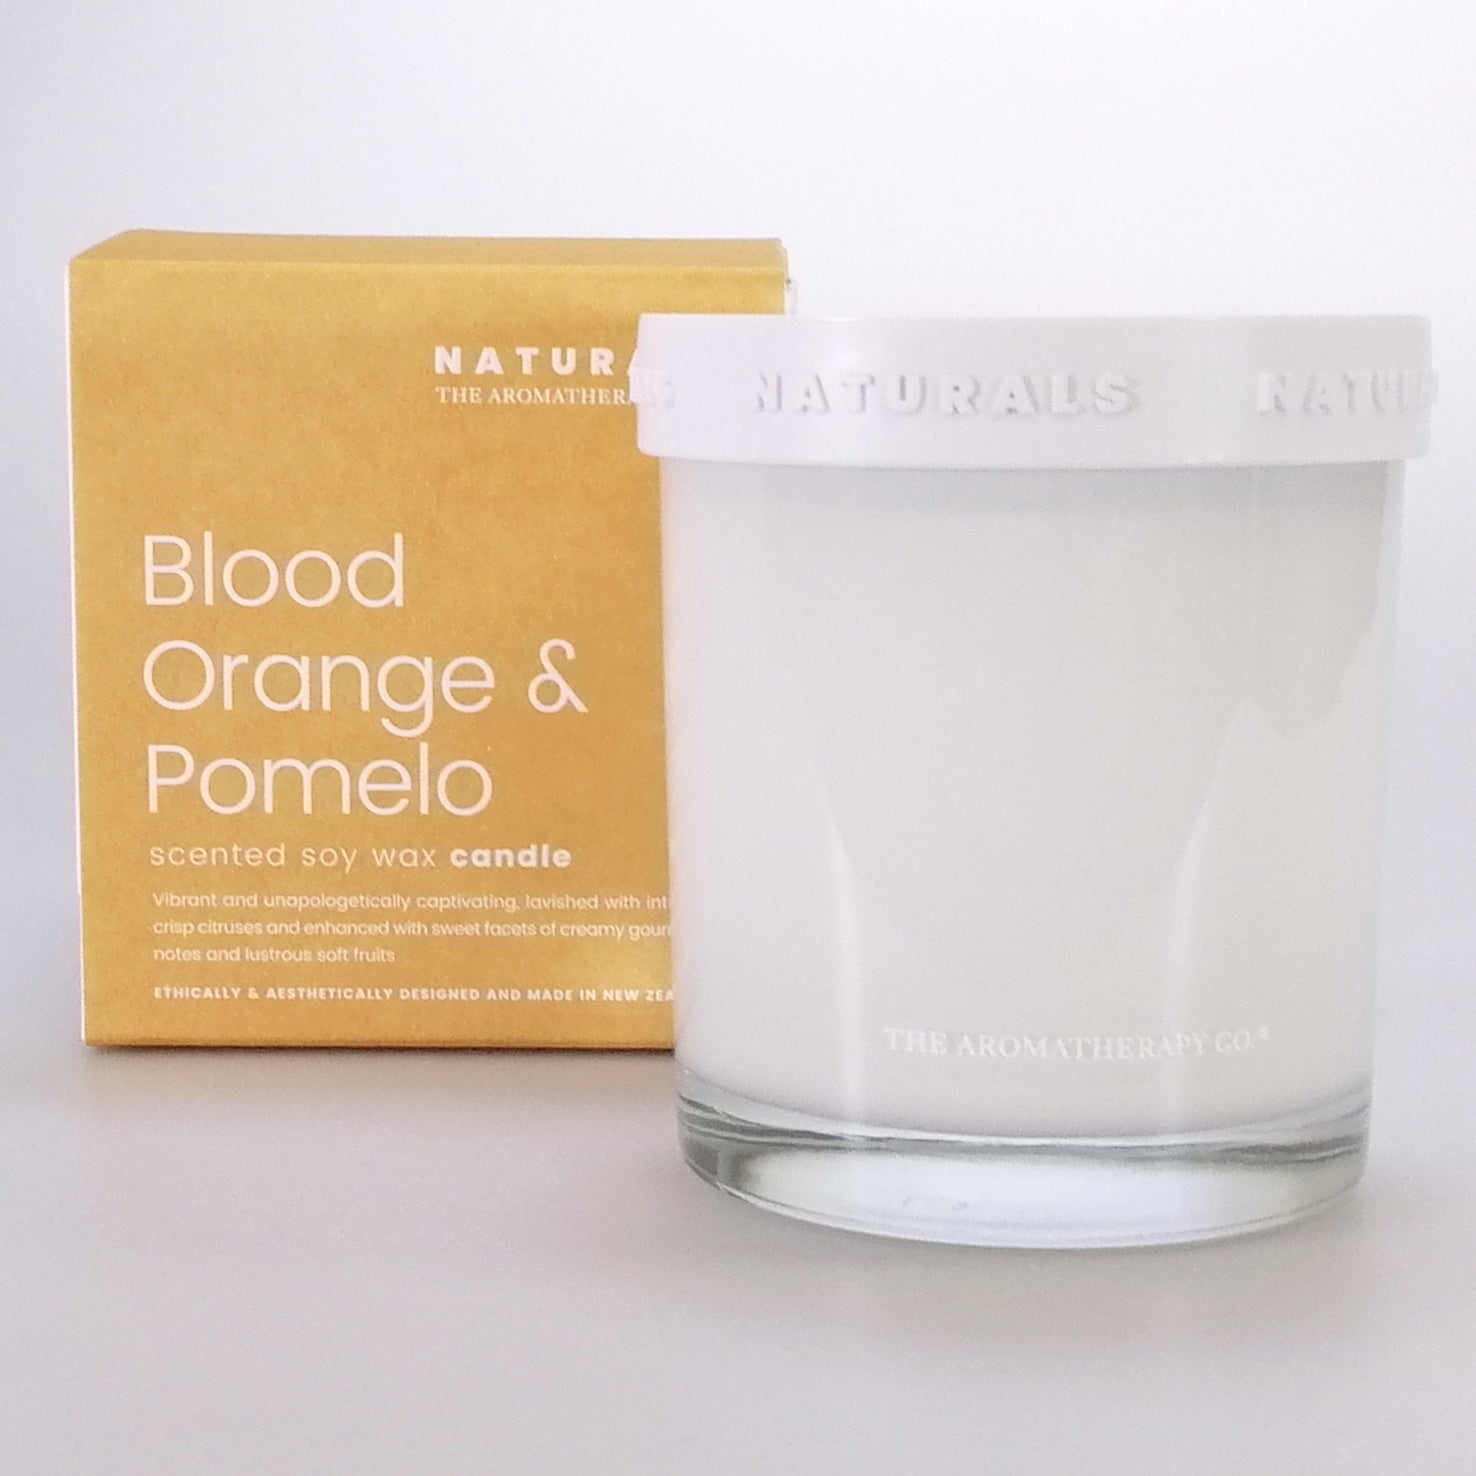 The Aromatherapy Co. Naturals - Blood Orange & Pomelo Soy Wax Candle